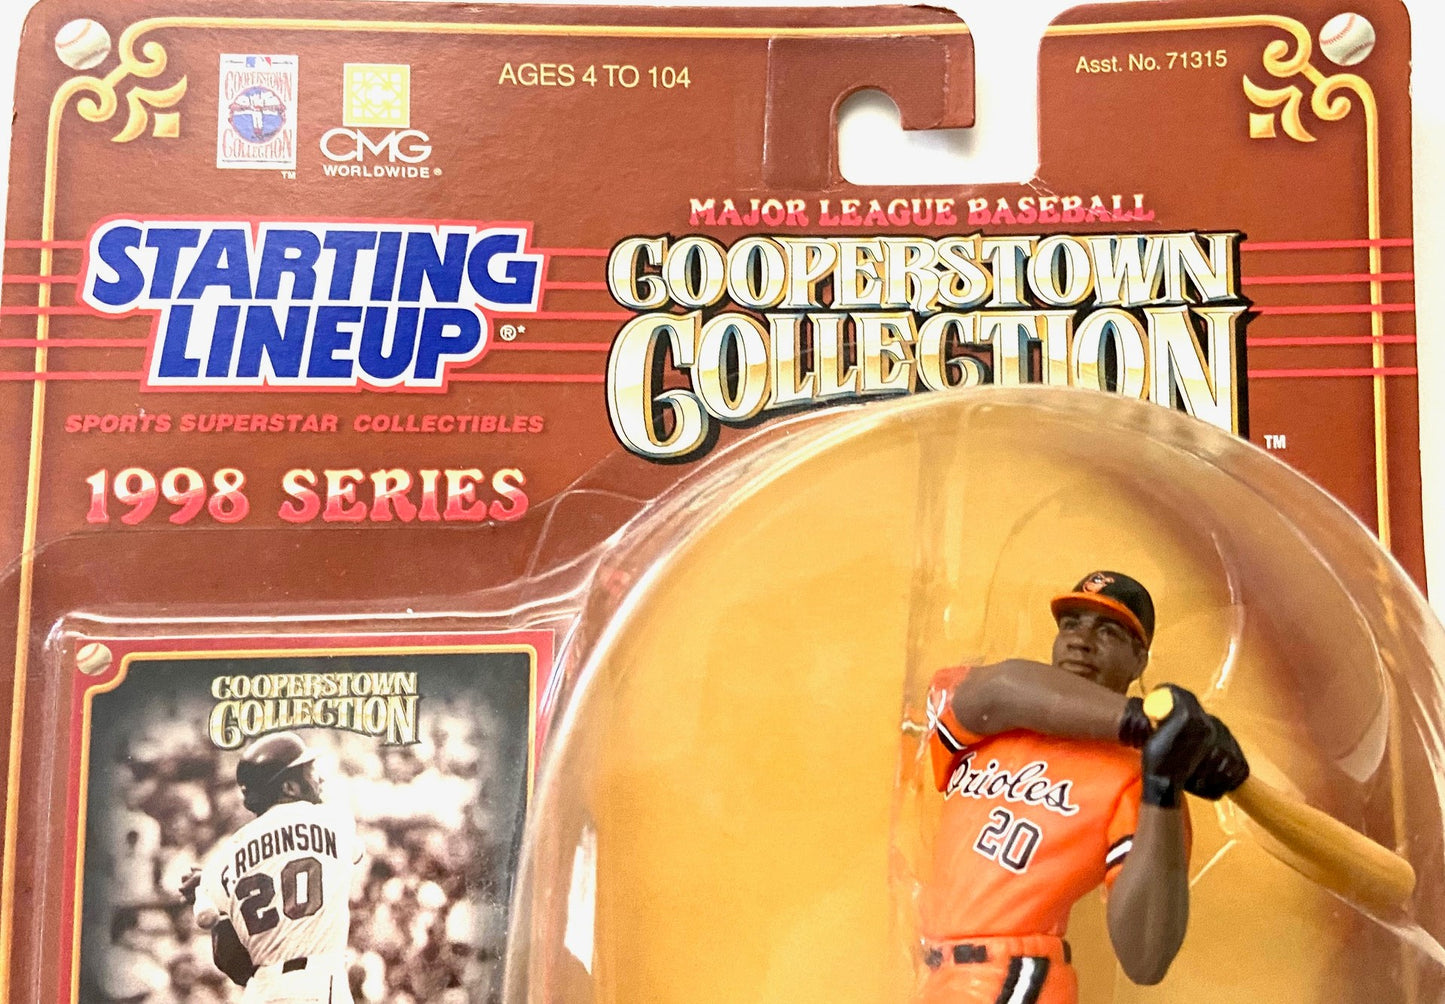 Frank Robinson 1998 Cooperstown Collection Starting Lineup MLB Figurine (New) by Kenner